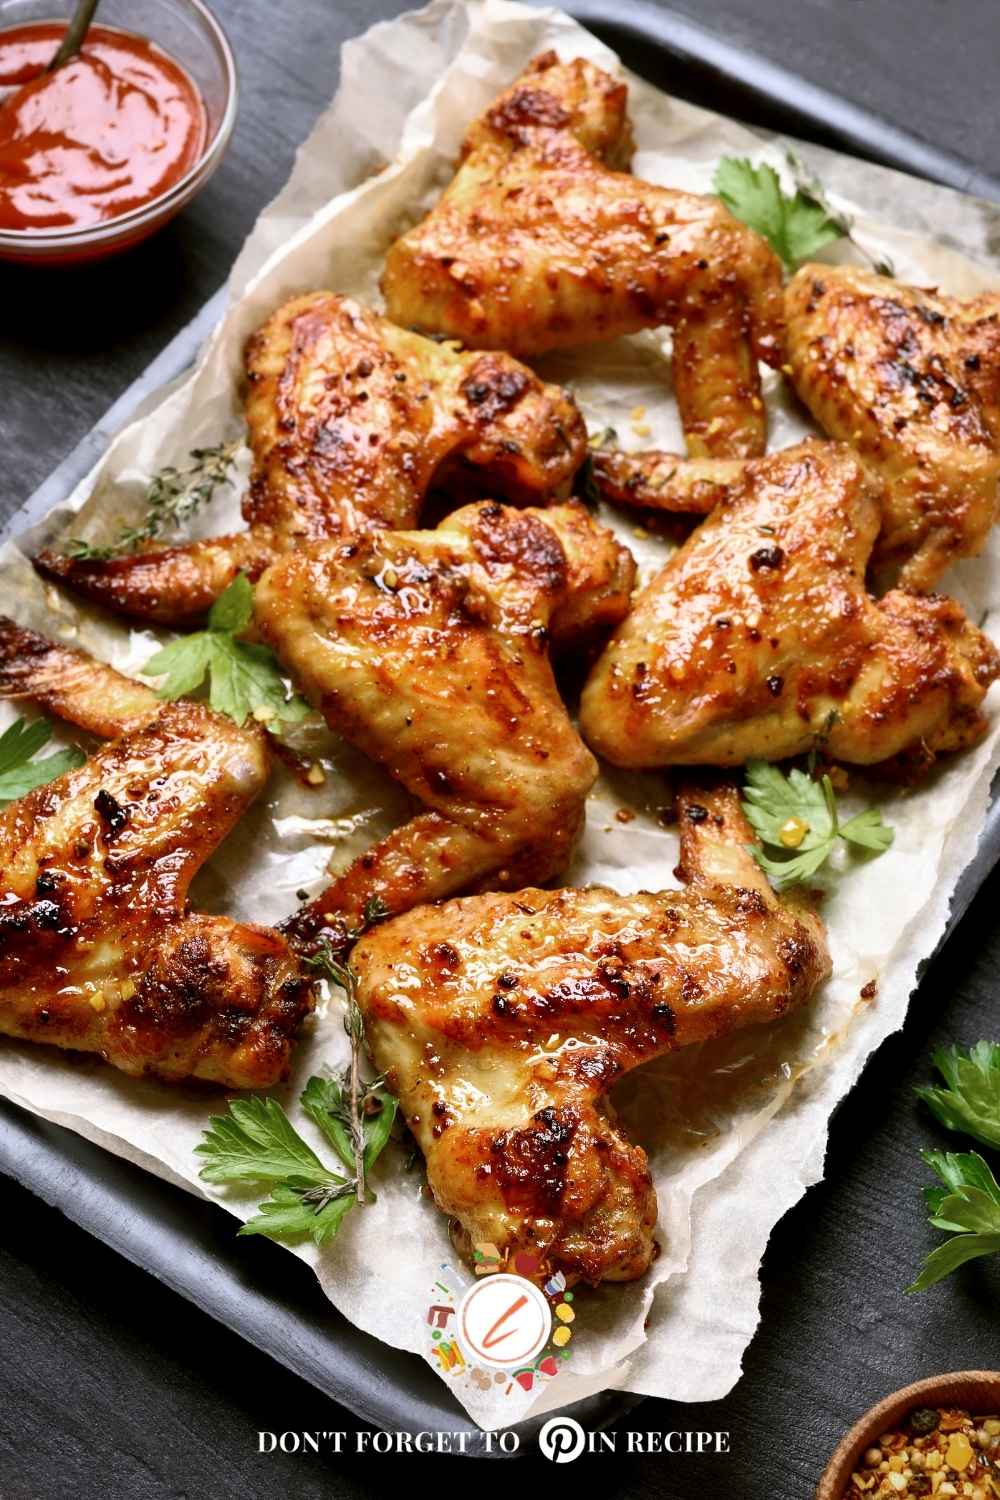 Spicy Paprika Wings Recipe - Life Time Vibes